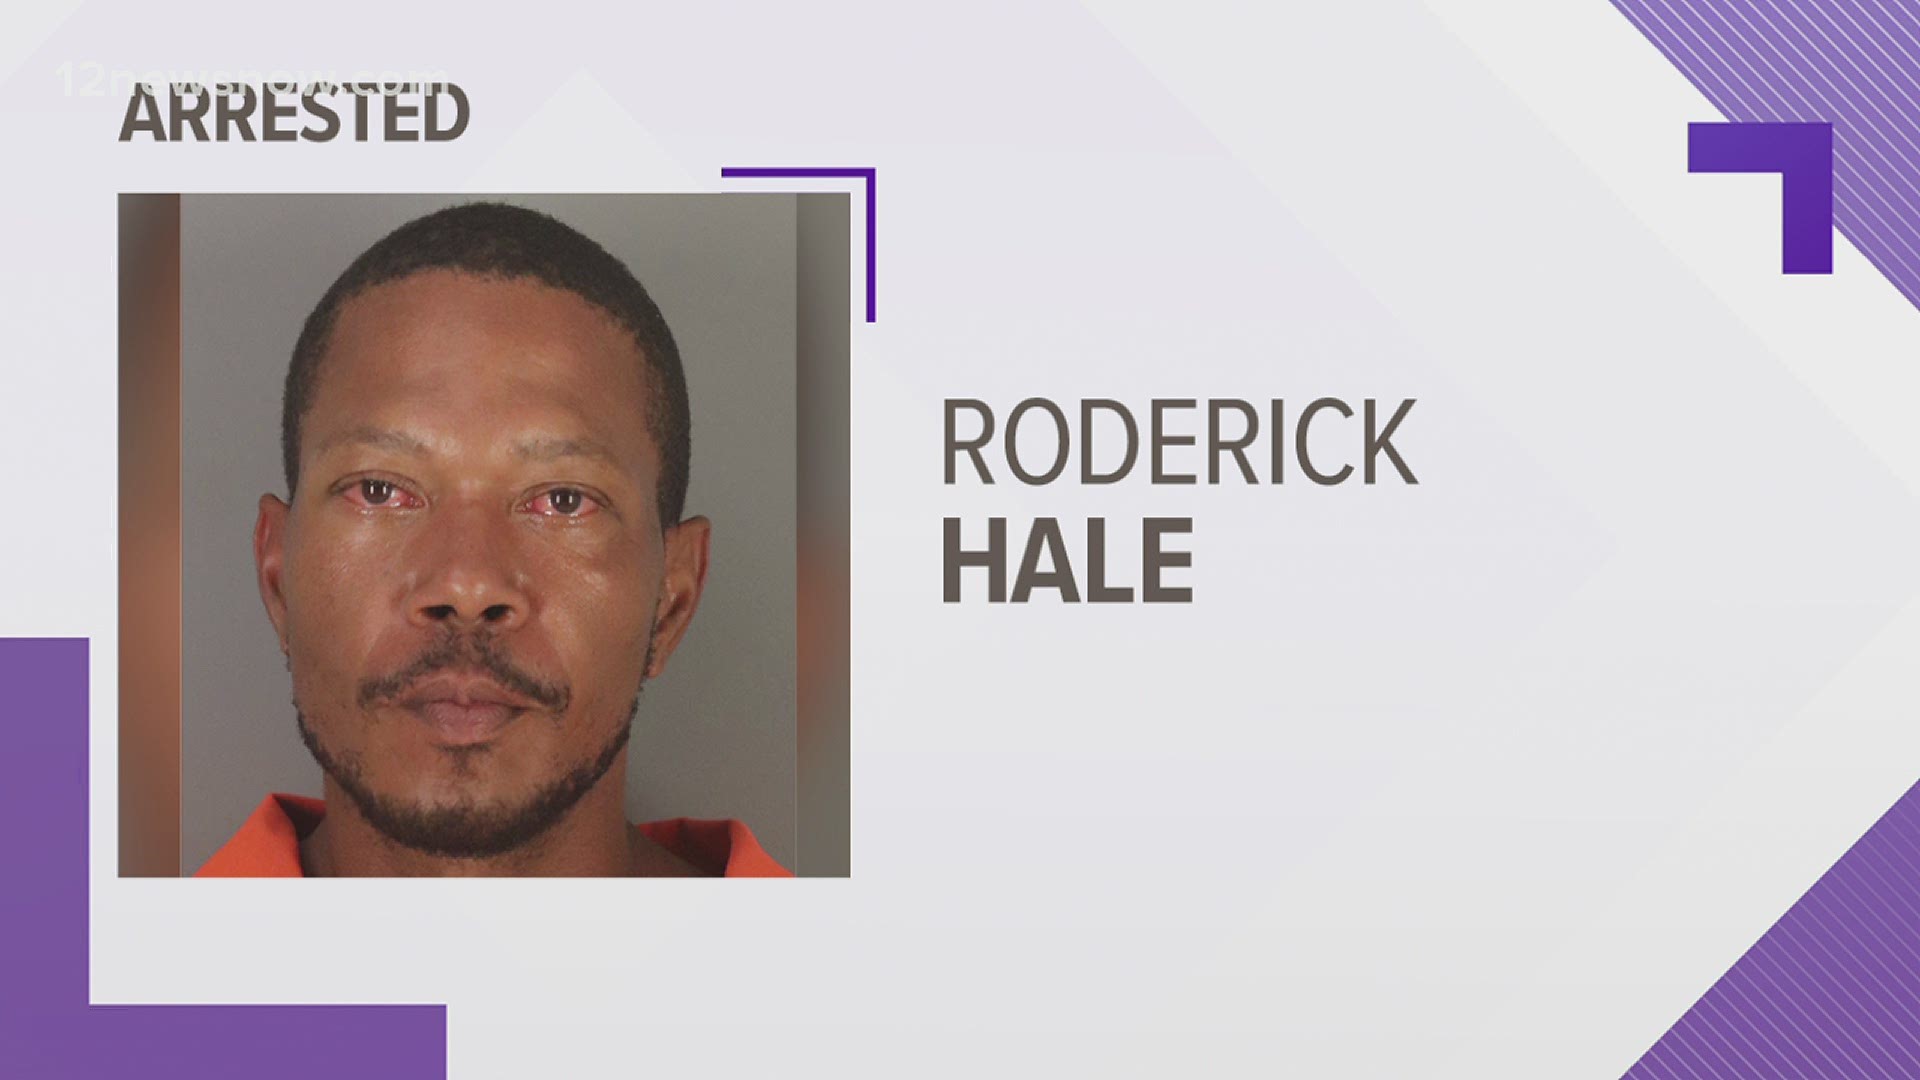 Roderick Hale is behind bars, but police say another suspect is on the run